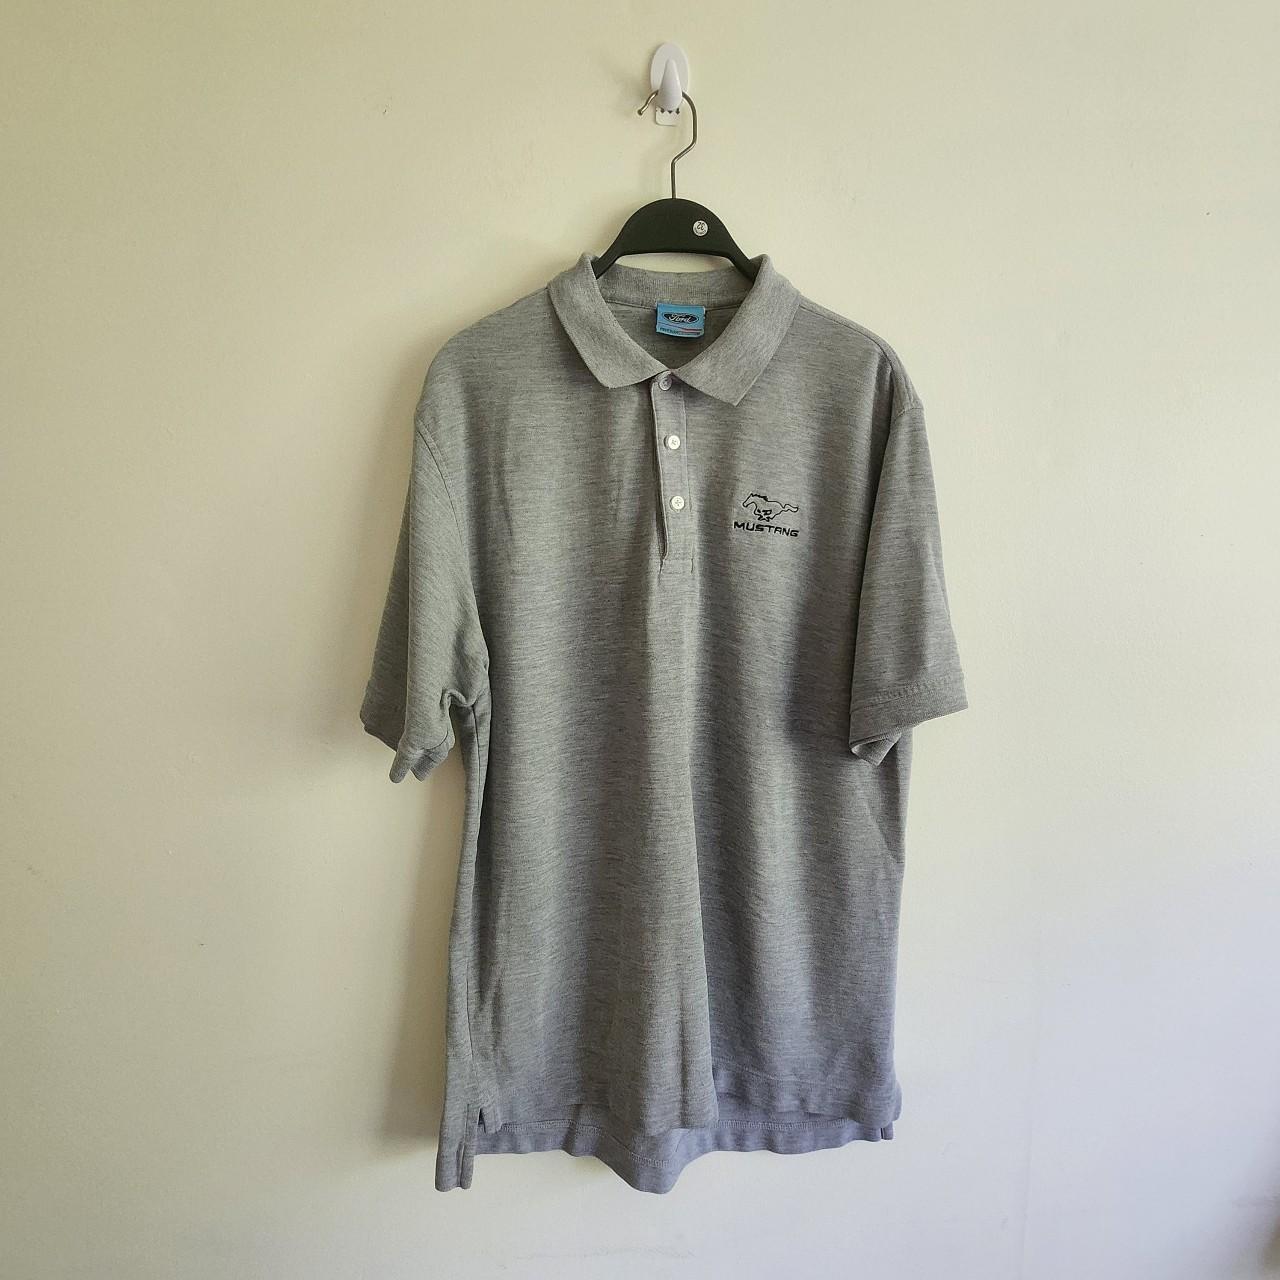 mens - stallion Mustang Ford Depop polo... embroidered running